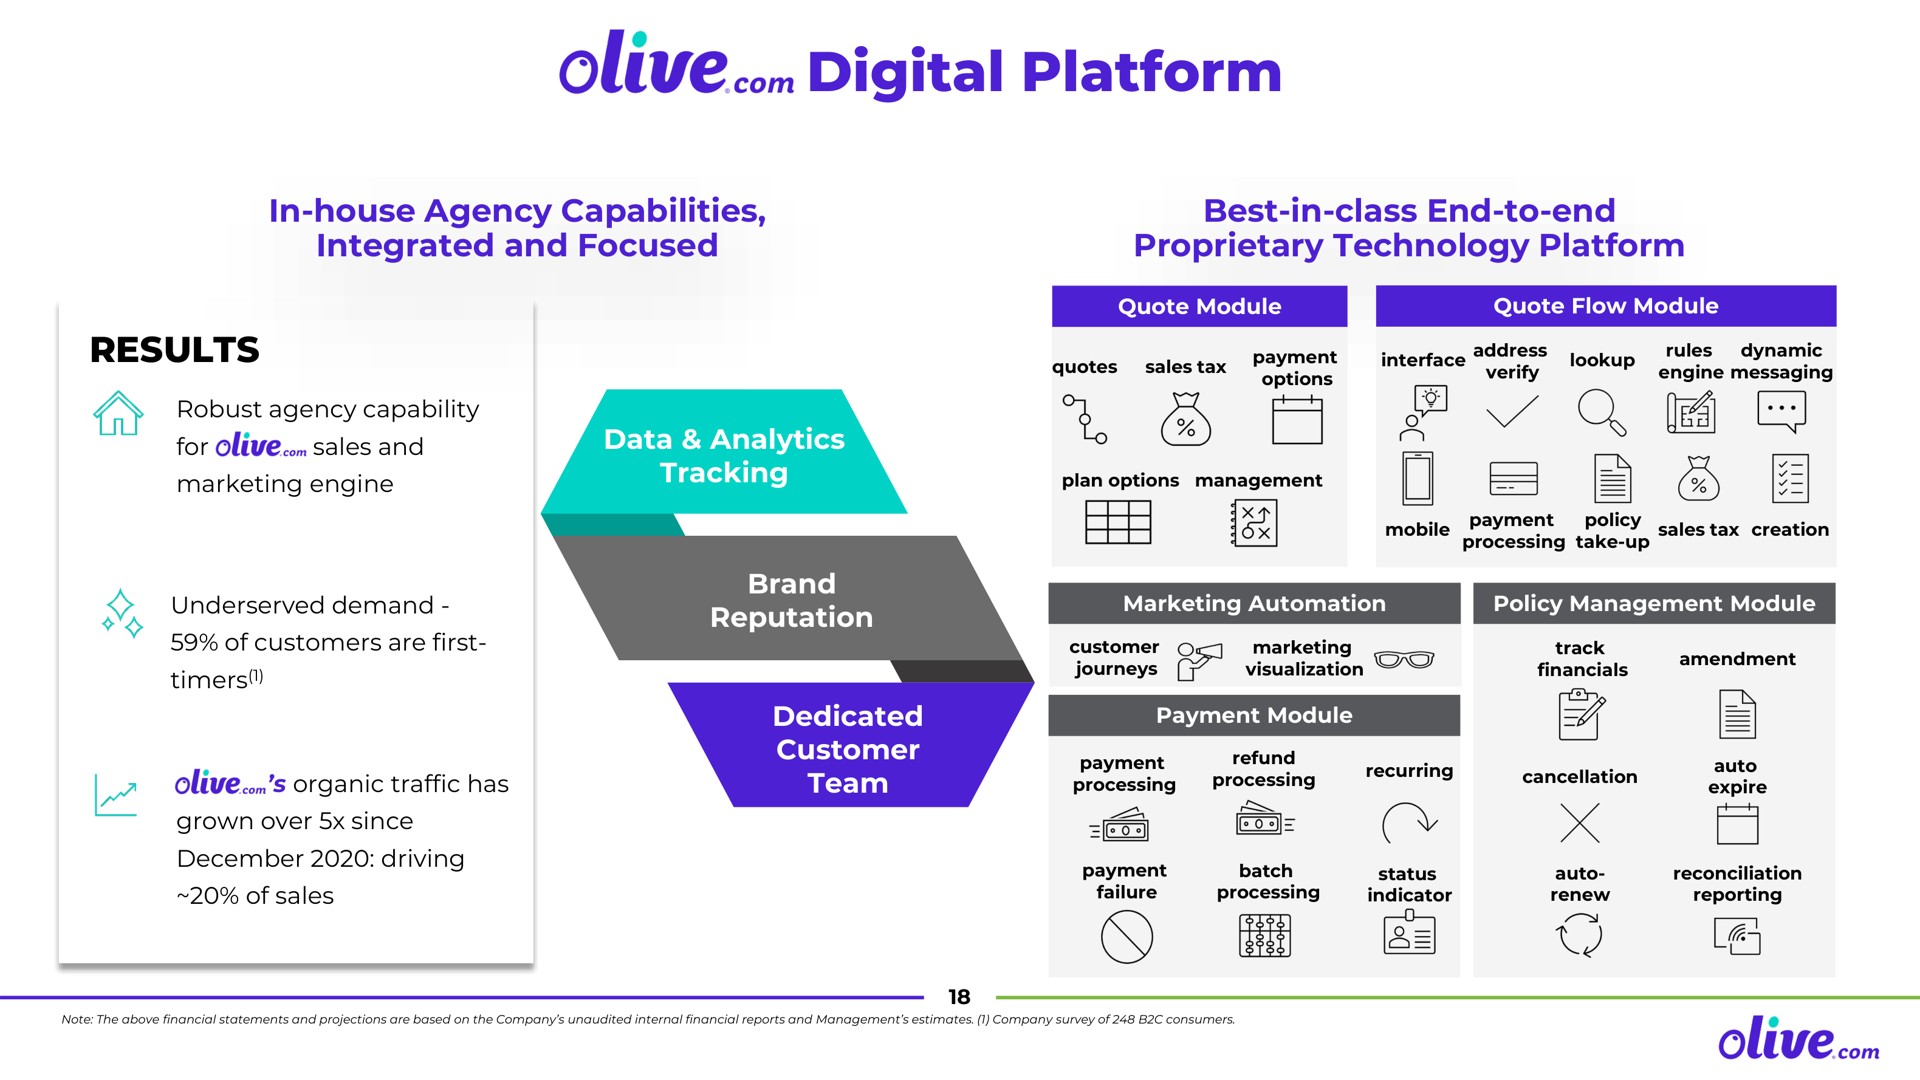 olive digital platform con results quotes payment interface messaging con | Olive.com